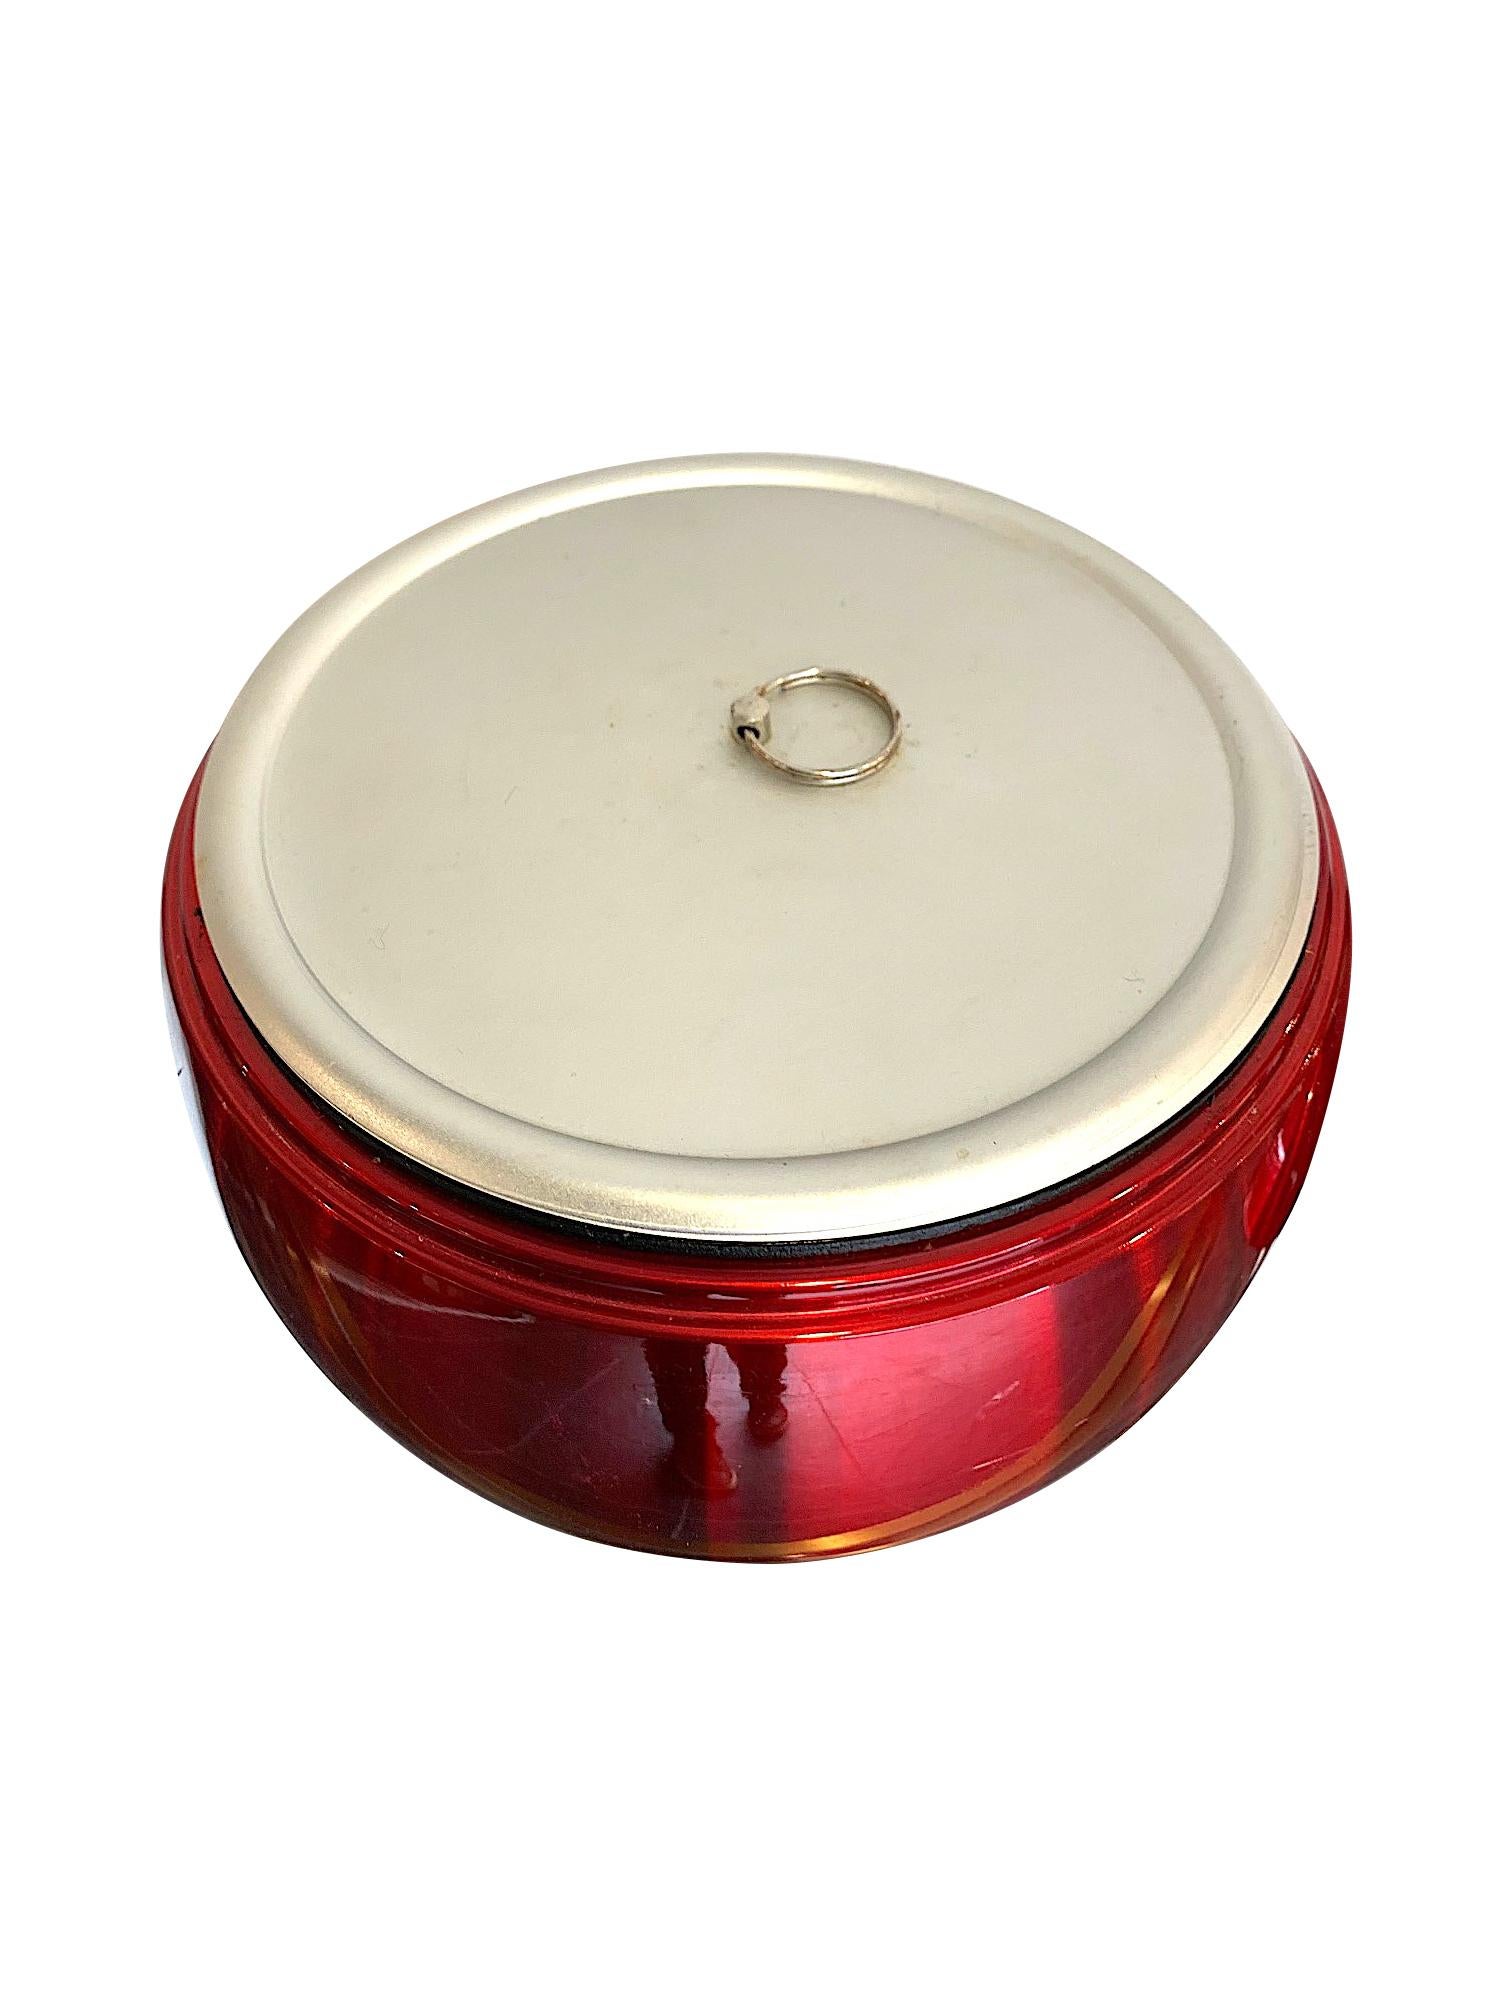 Australian 1970s Cherry Ice Bucket by Daydream in Anodised Vibrant Red with Brass Handle